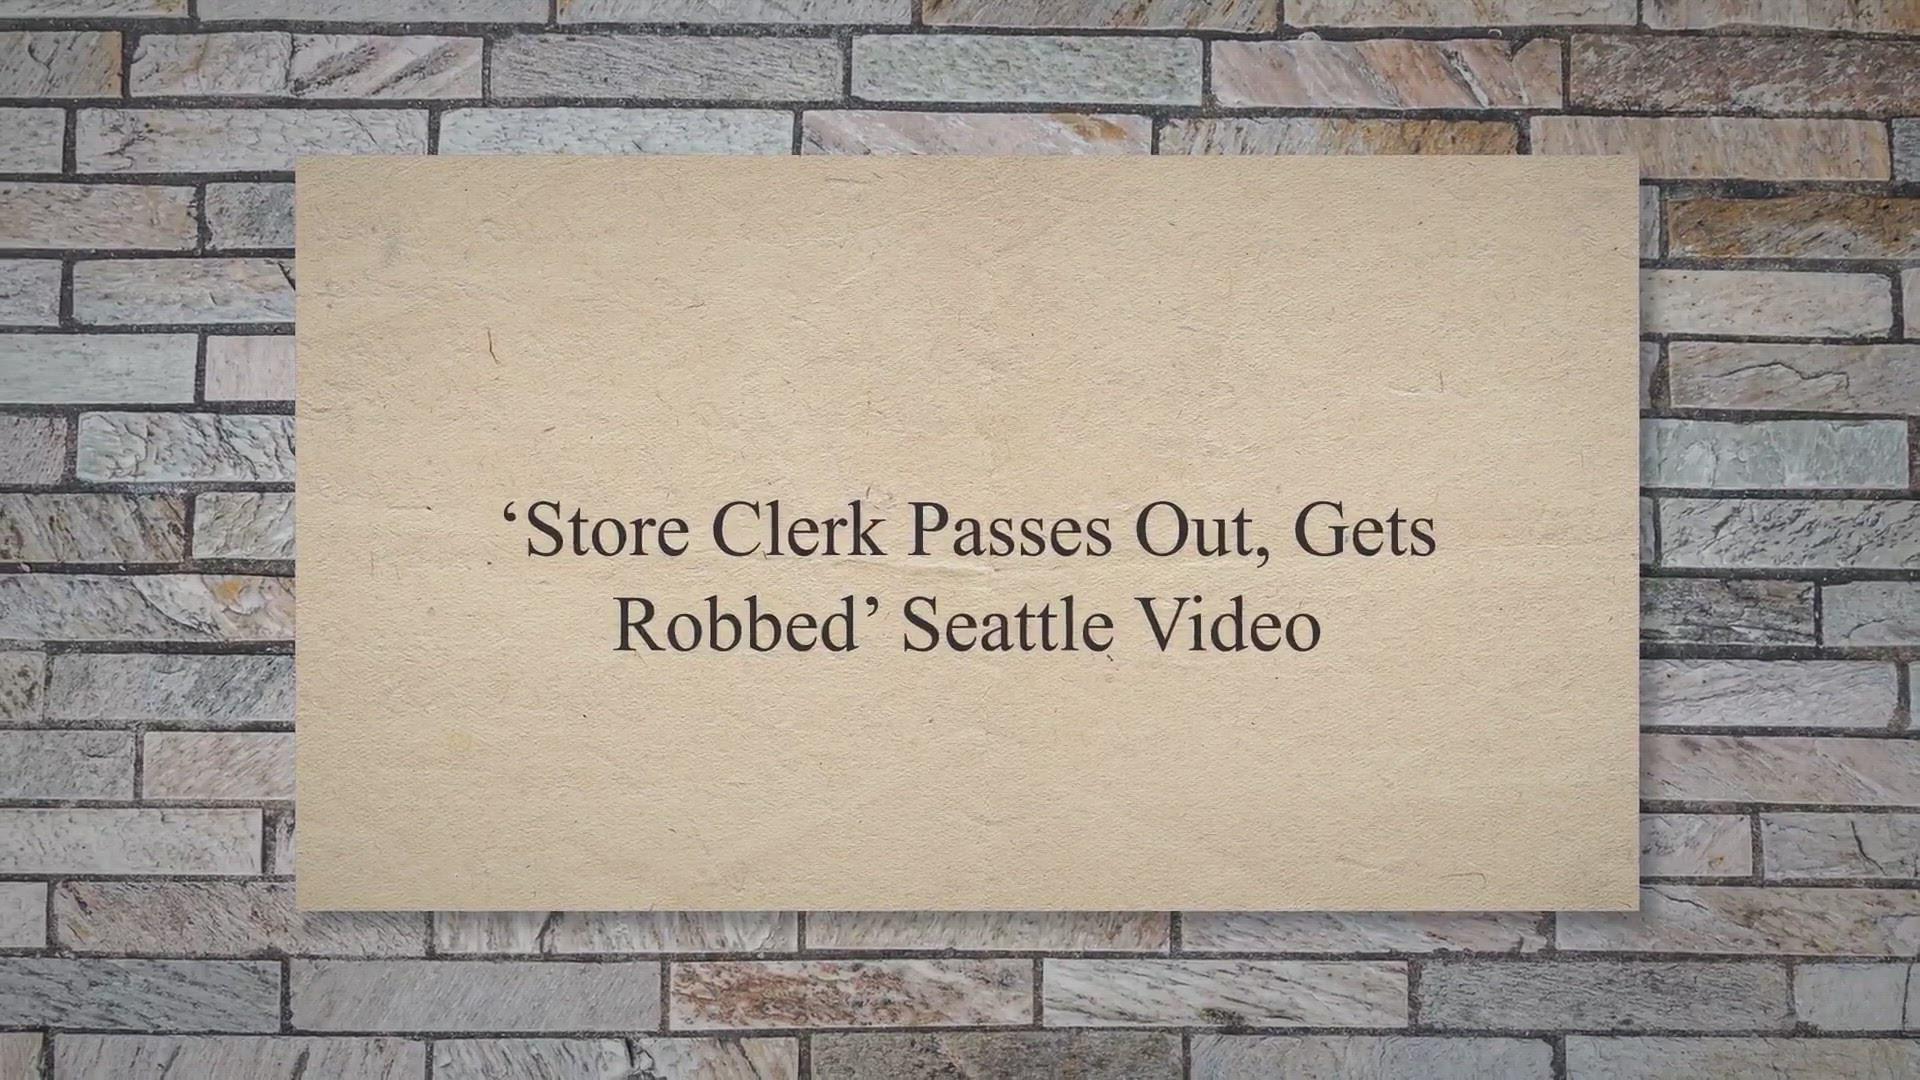 'Video thumbnail for ‘Store Clerk Passes Out, Gets Robbed’ Seattle Video'